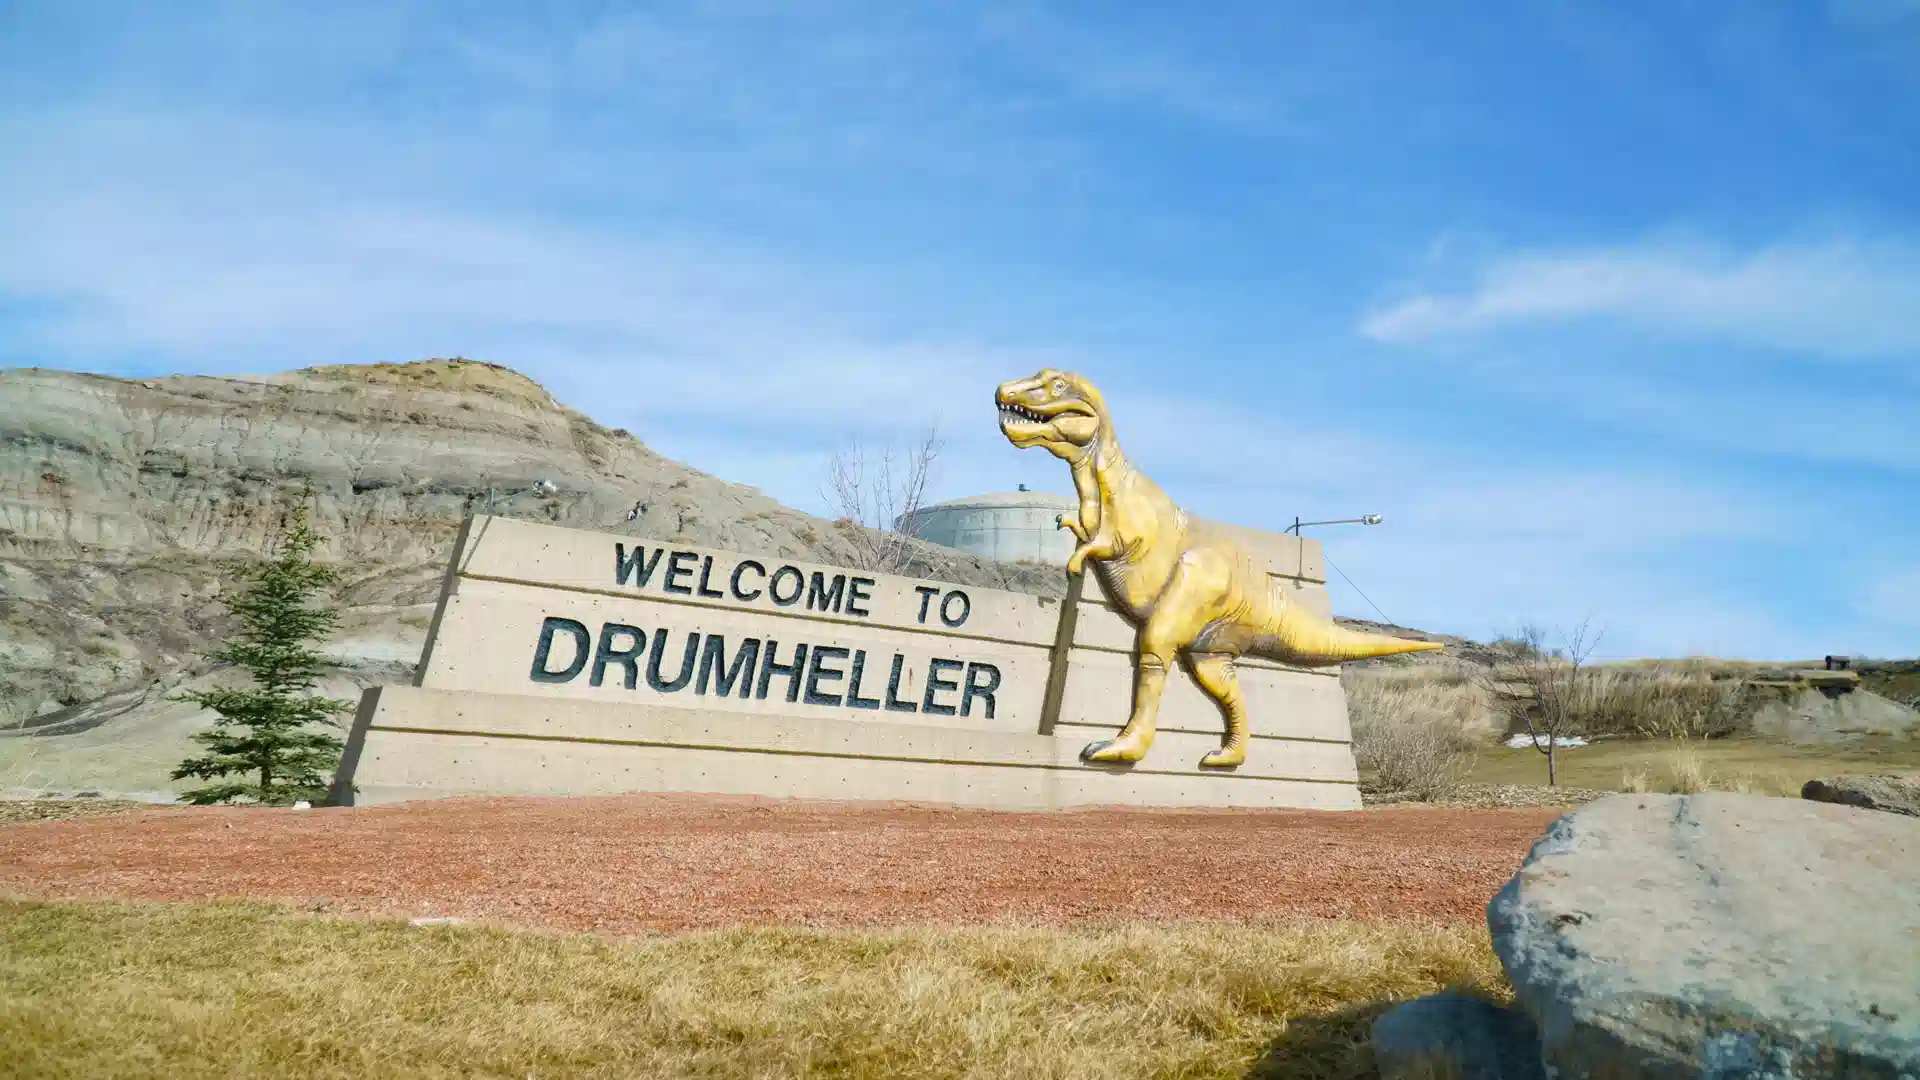 Welcome to Drumheller image